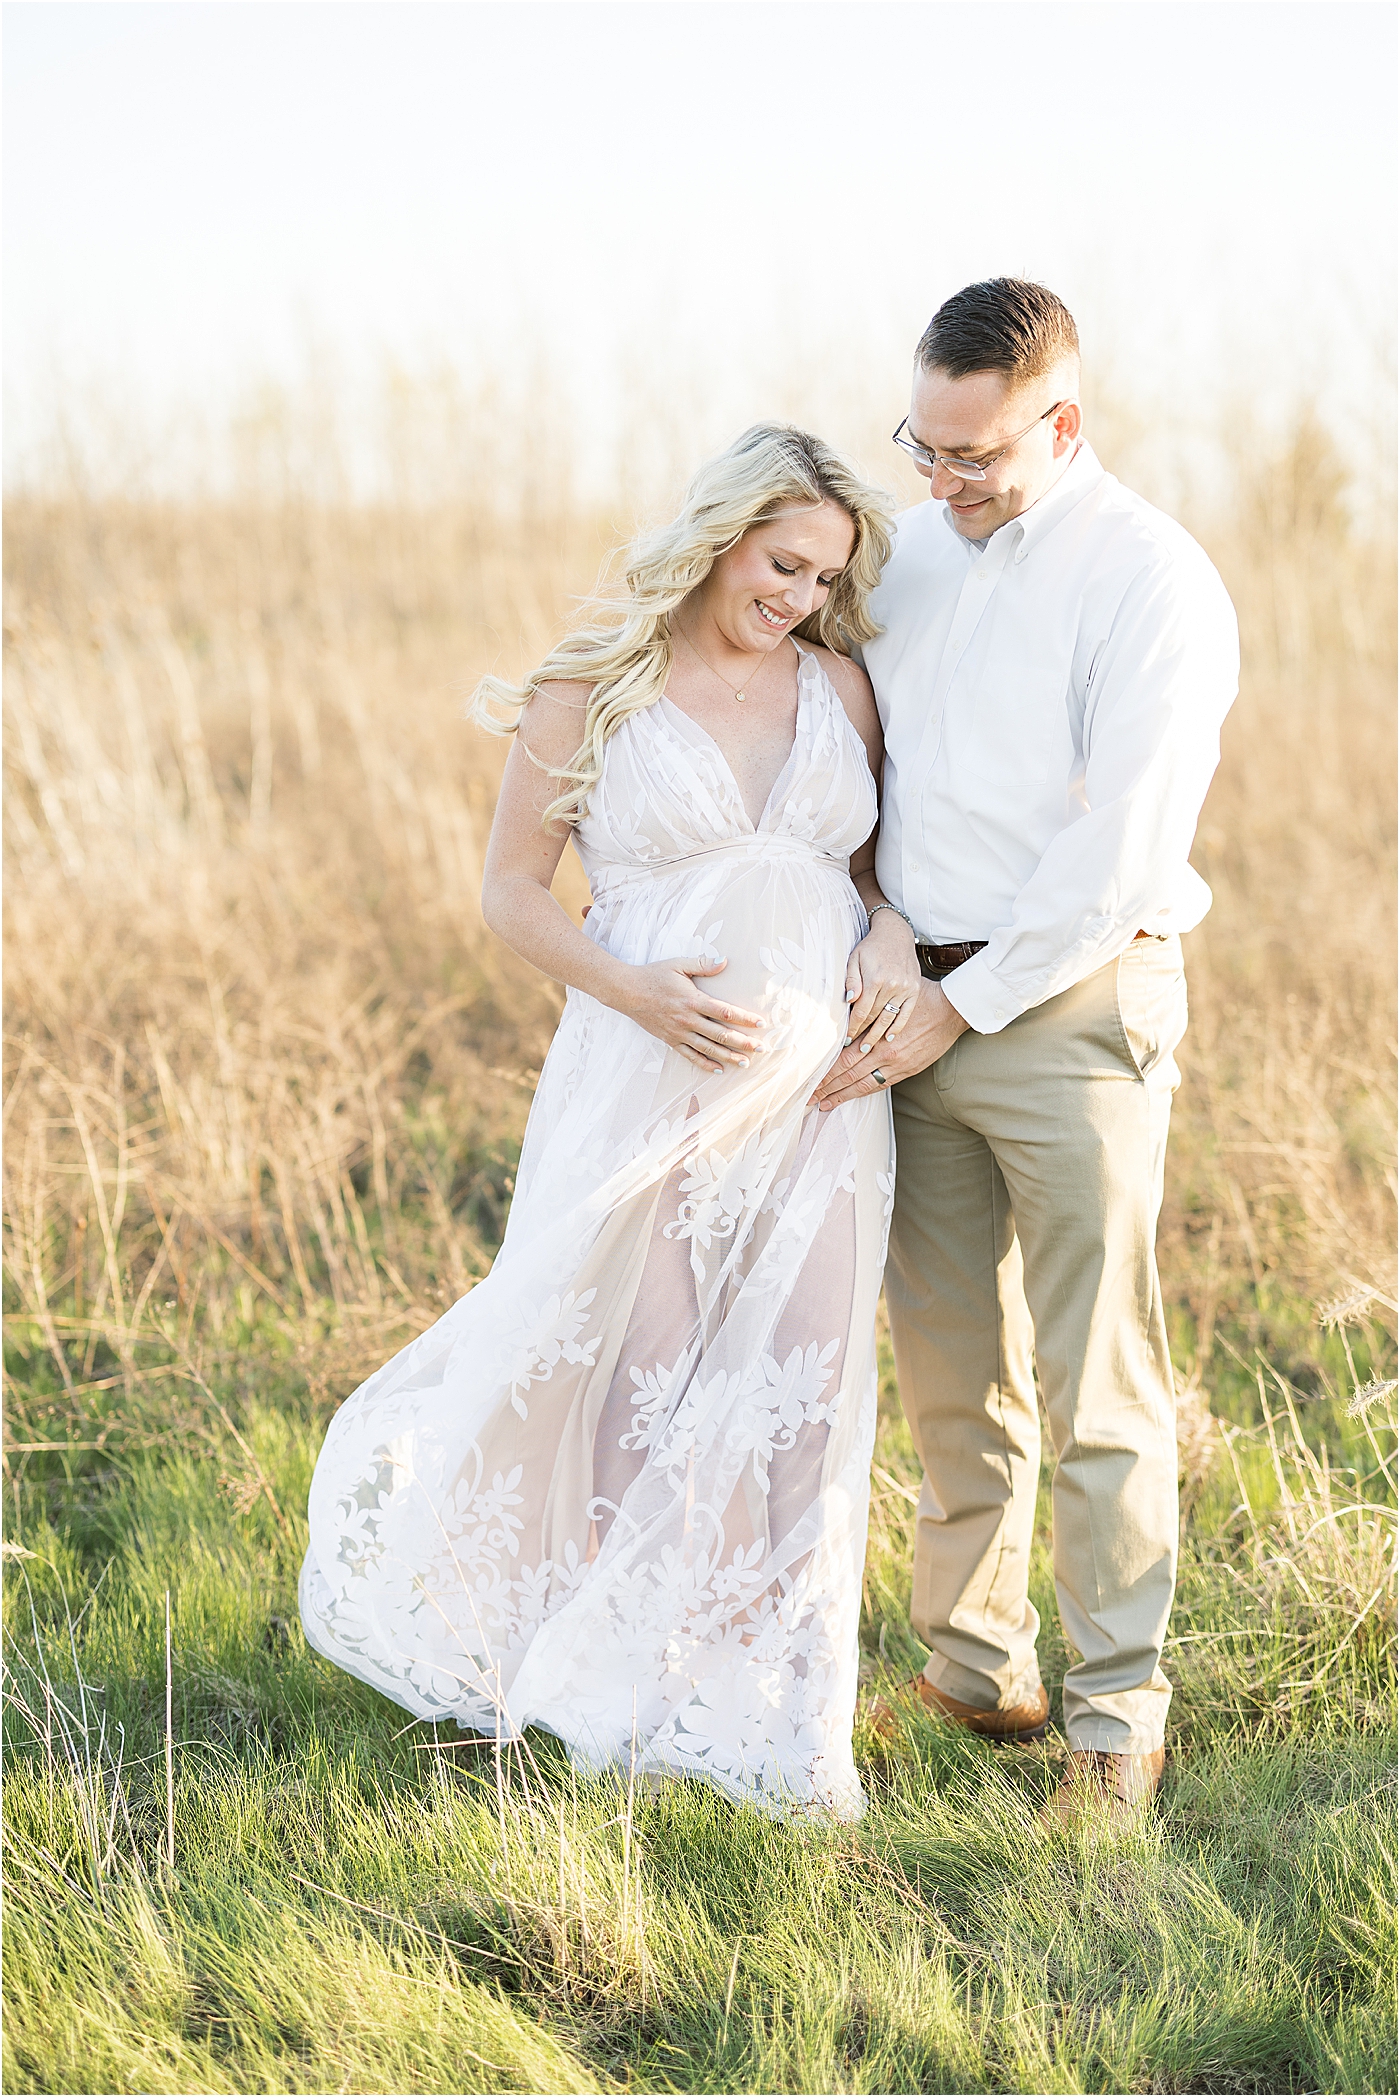 Sunset maternity session at Flat Fork Creek Park in Fishers, IN. Photo by Lindsay Konopa Photography.